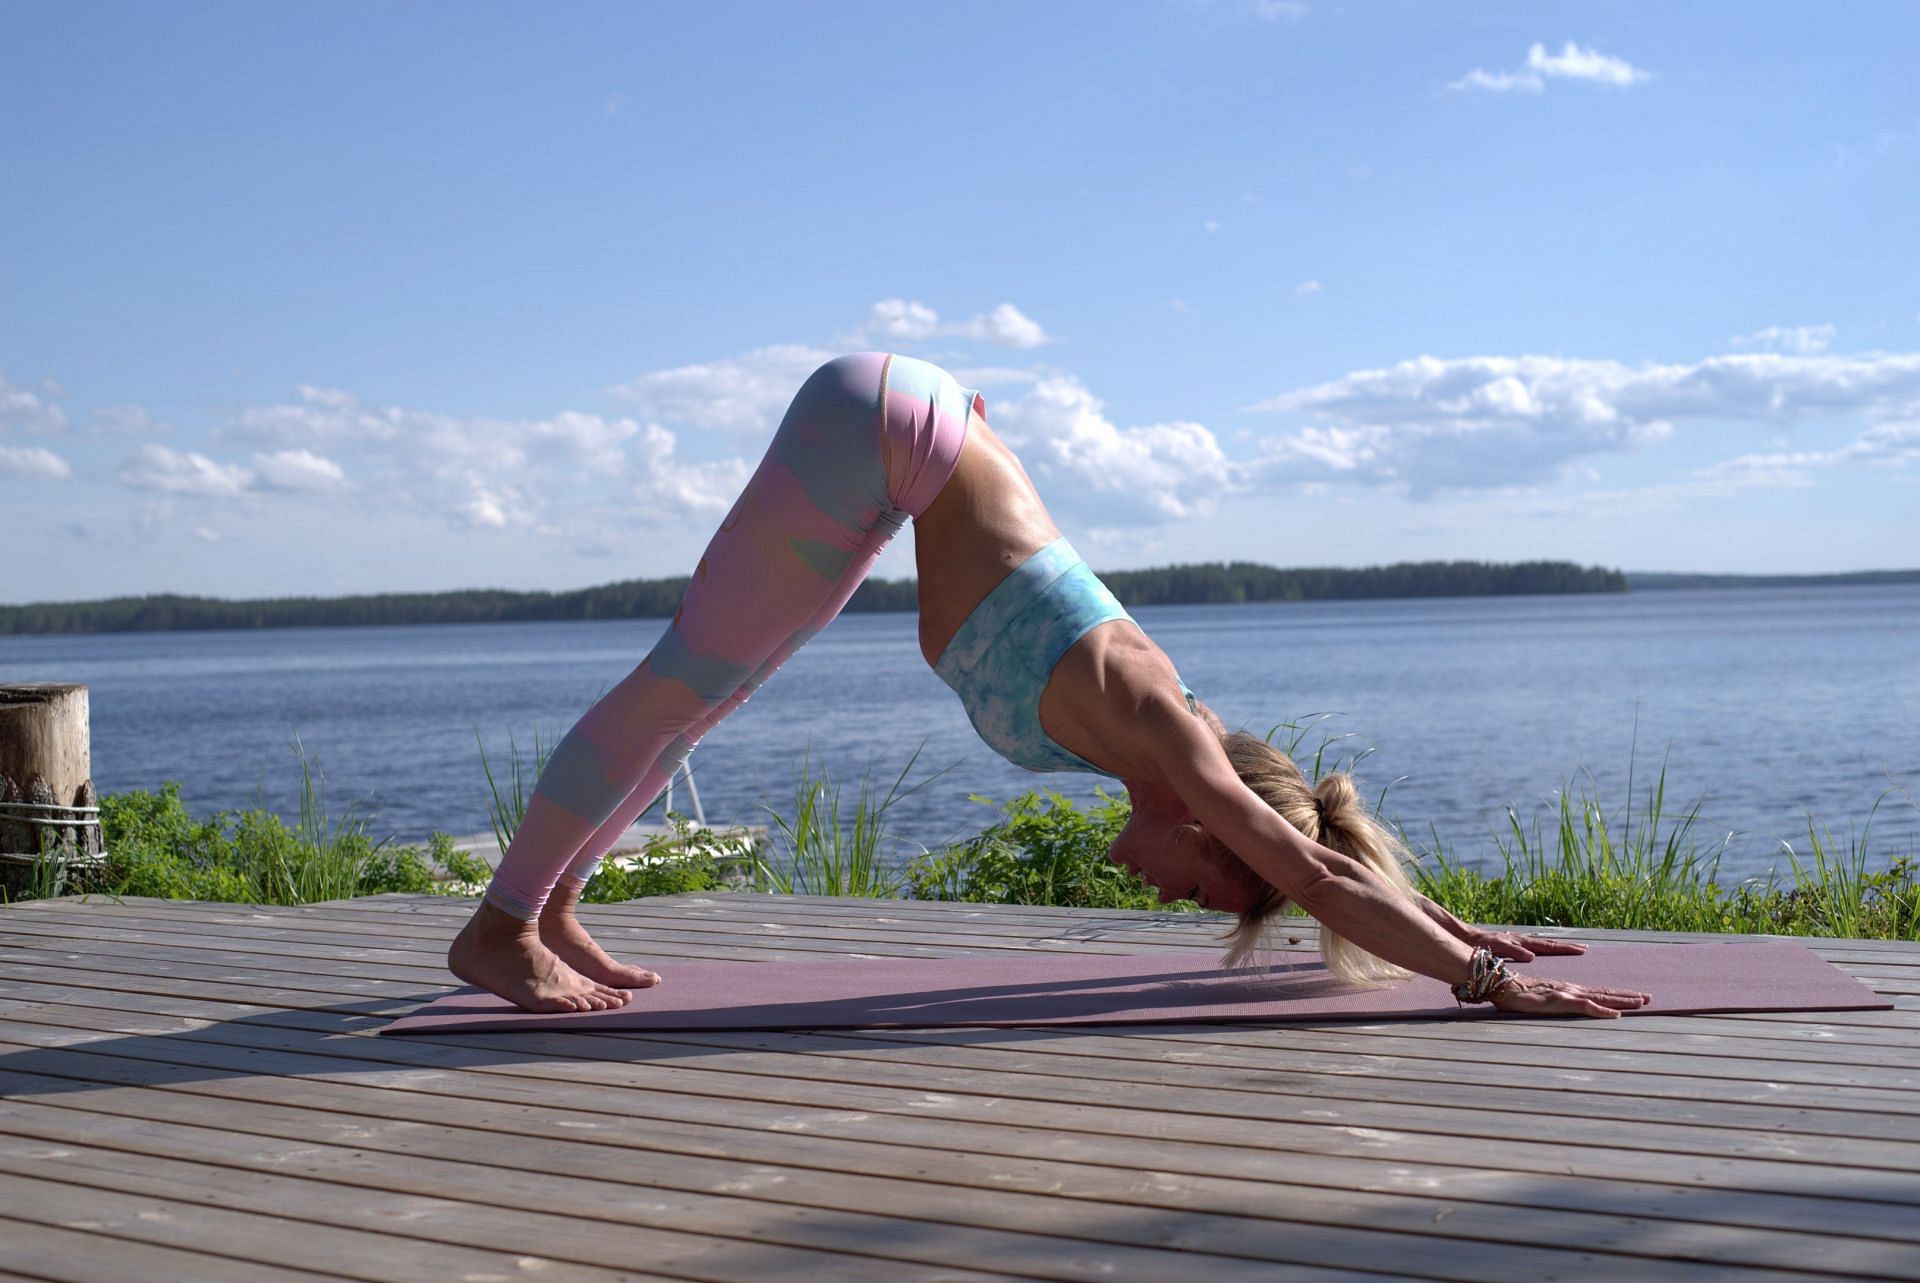 How to Modify 5 Common Power Yoga Poses | YouAligned.com